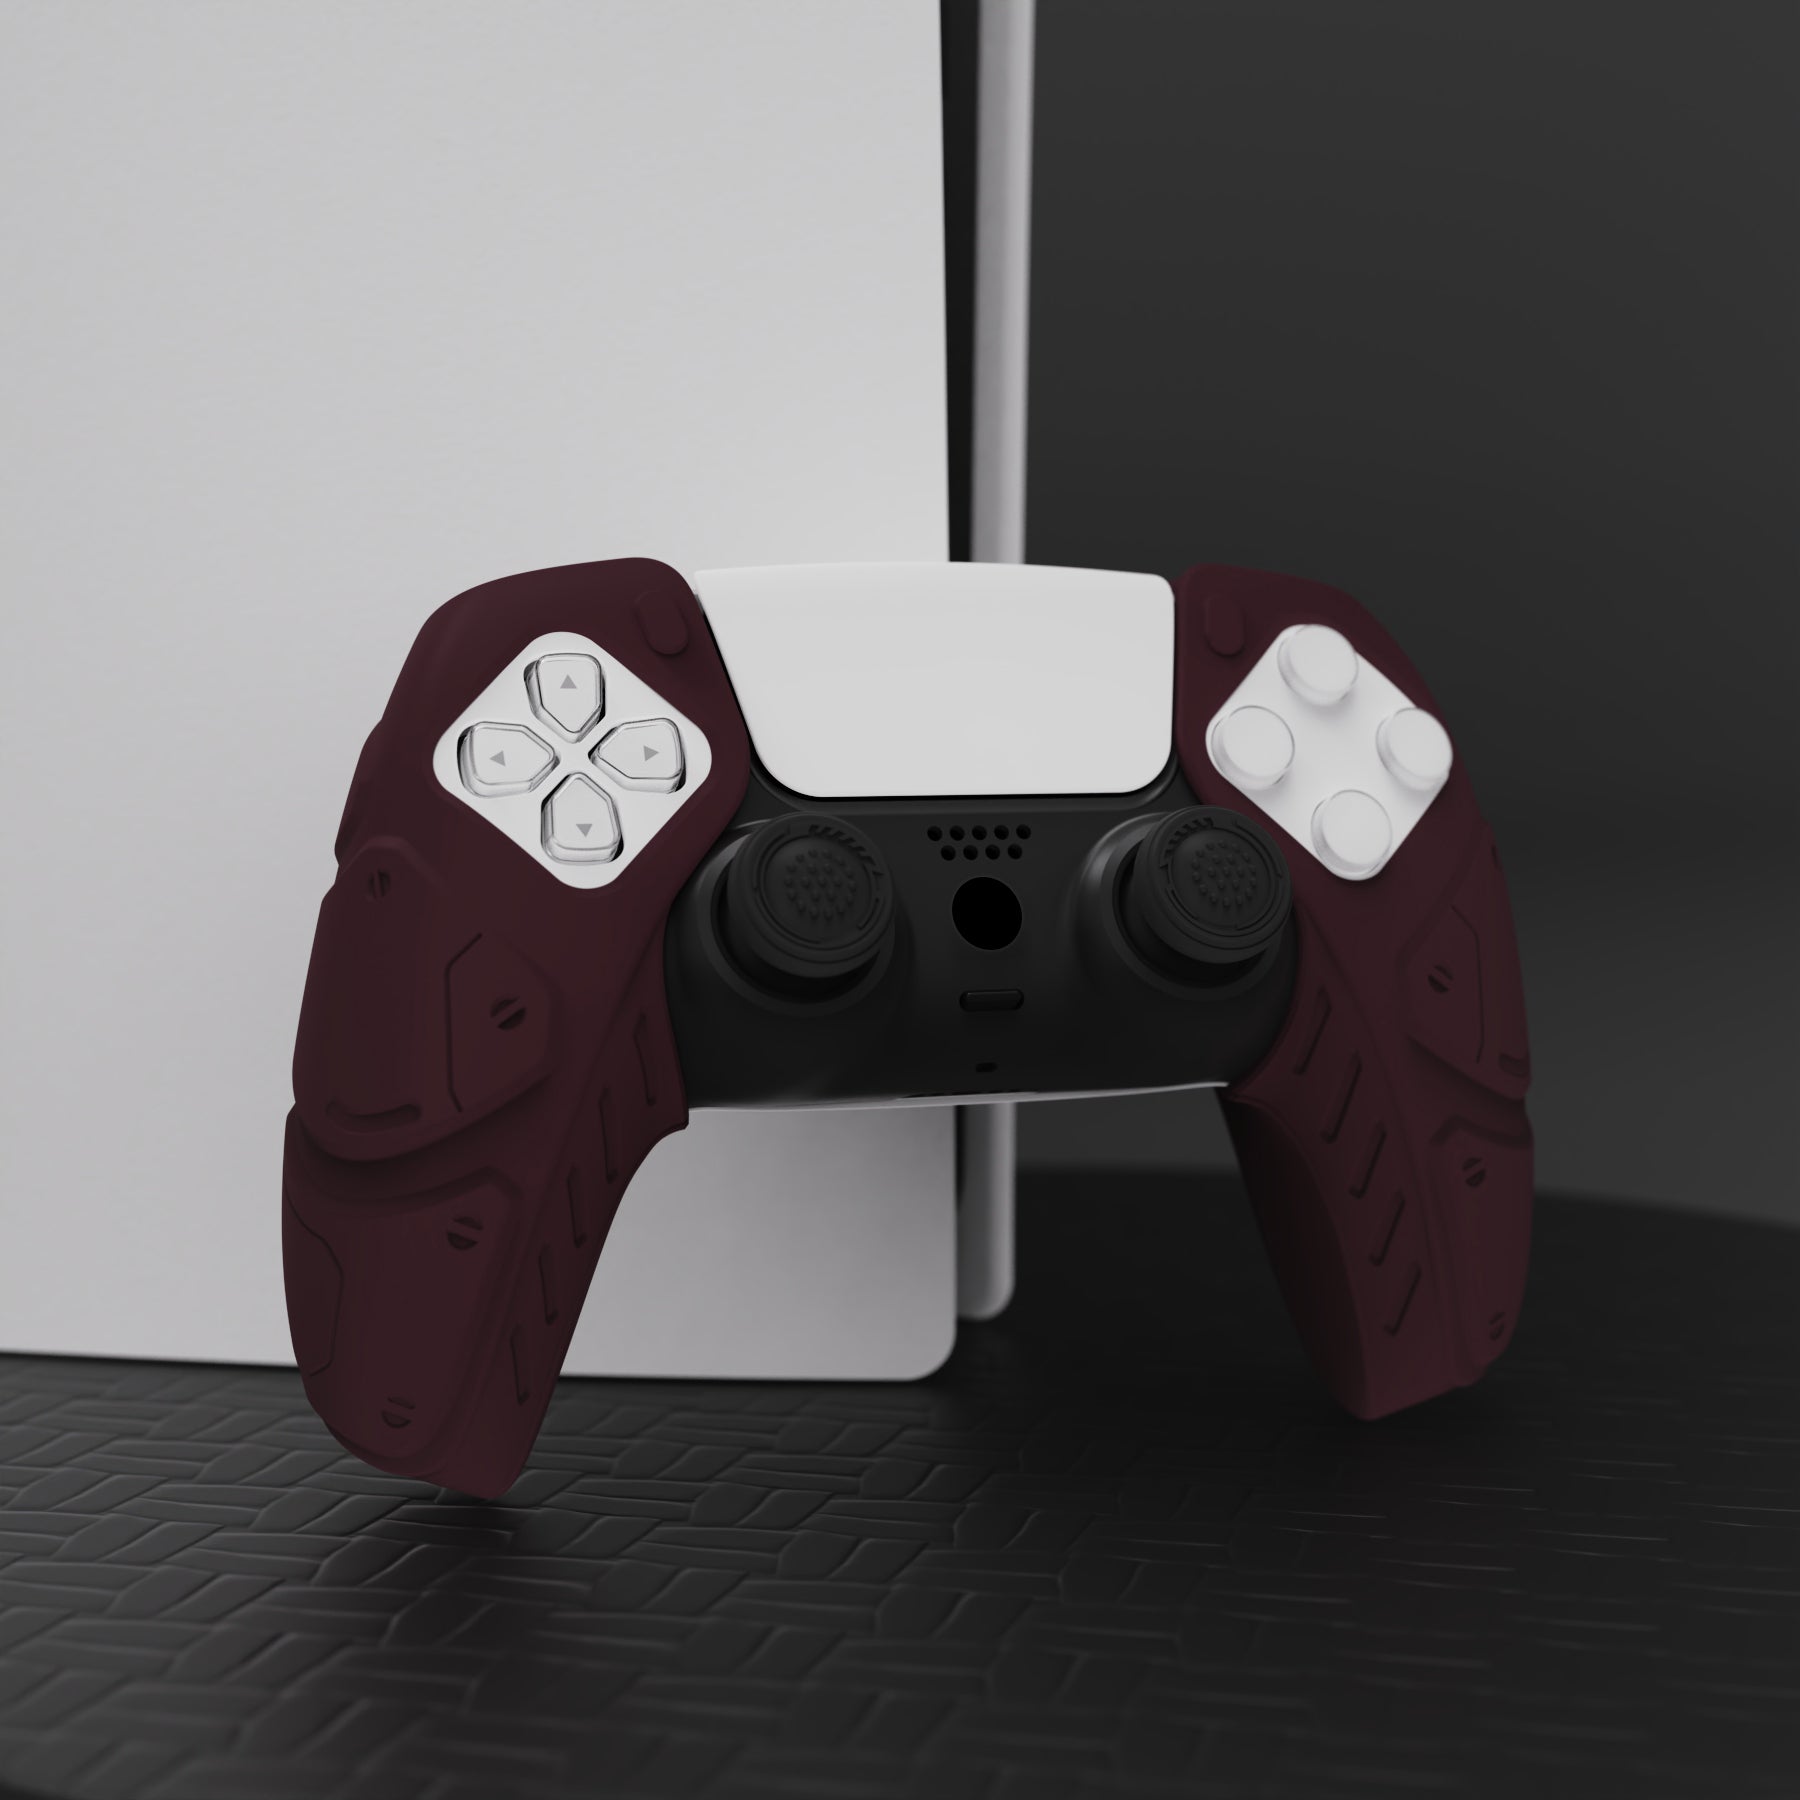 PlayVital Mecha Edition Anti-Slip Silicone Cover Skin with Thumb Grip Caps for PS5 Wireless Controller - Compatible with Charging Station - Wine Red - JGPF006 PlayVital